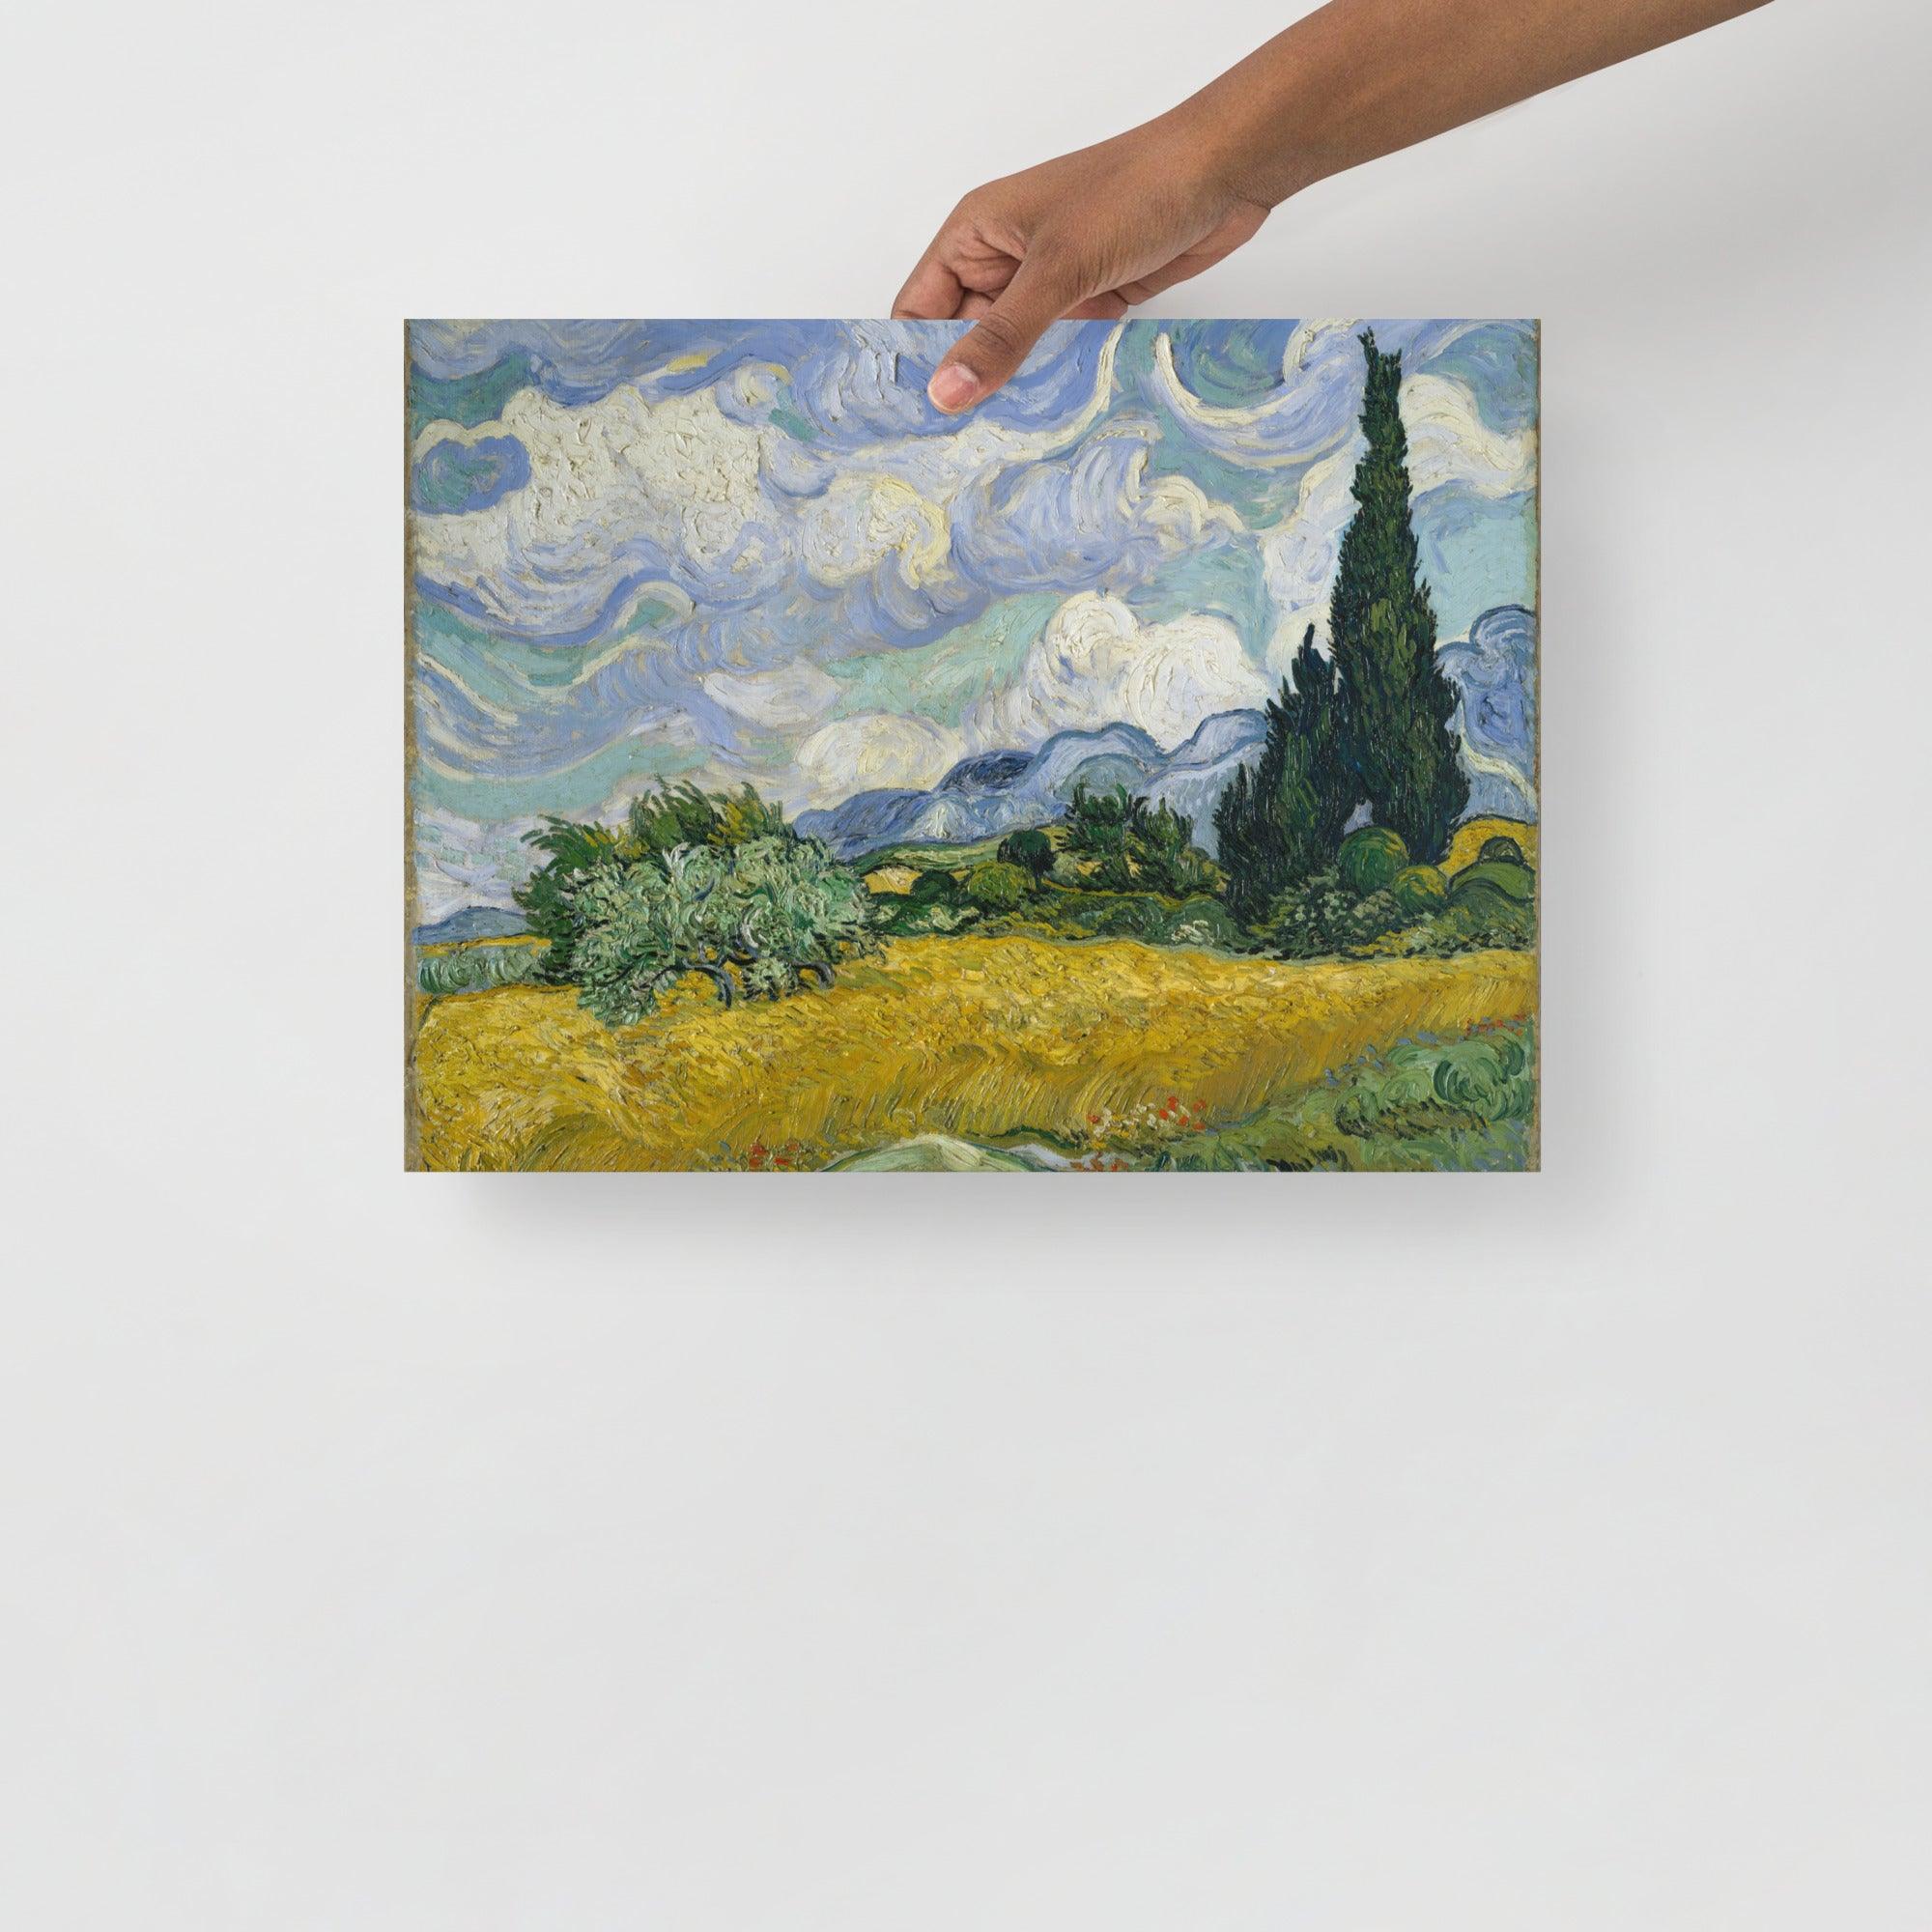 A Wheat Field with Cypresses by Vincent van Gogh poster on a plain backdrop in size 12x16”.